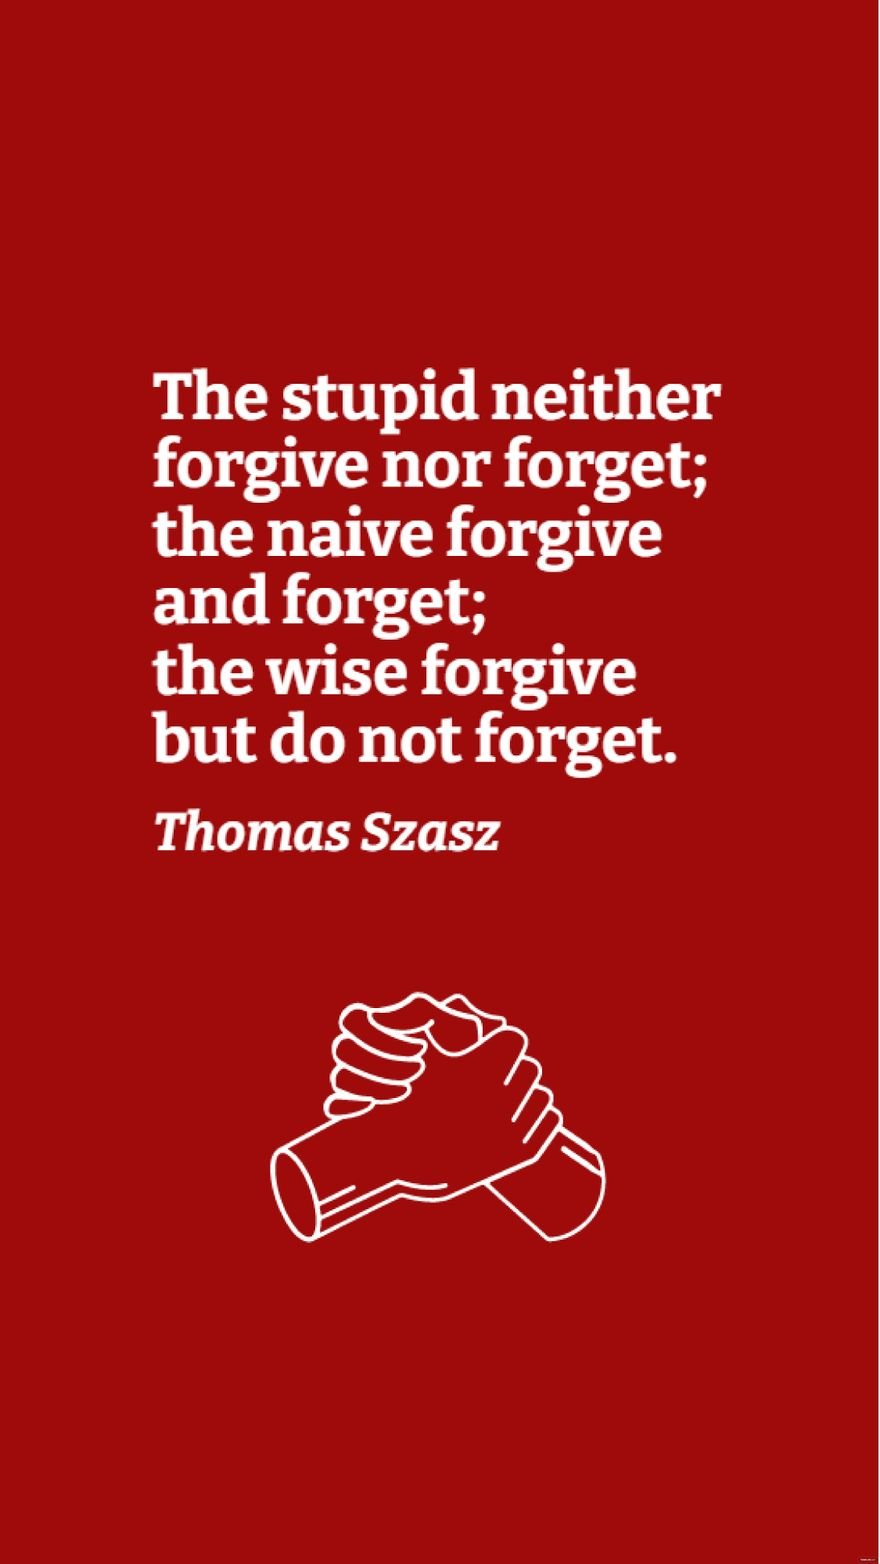 Thomas Szasz - The stupid neither forgive nor forget; the naive forgive and forget; the wise forgive but do not forget.